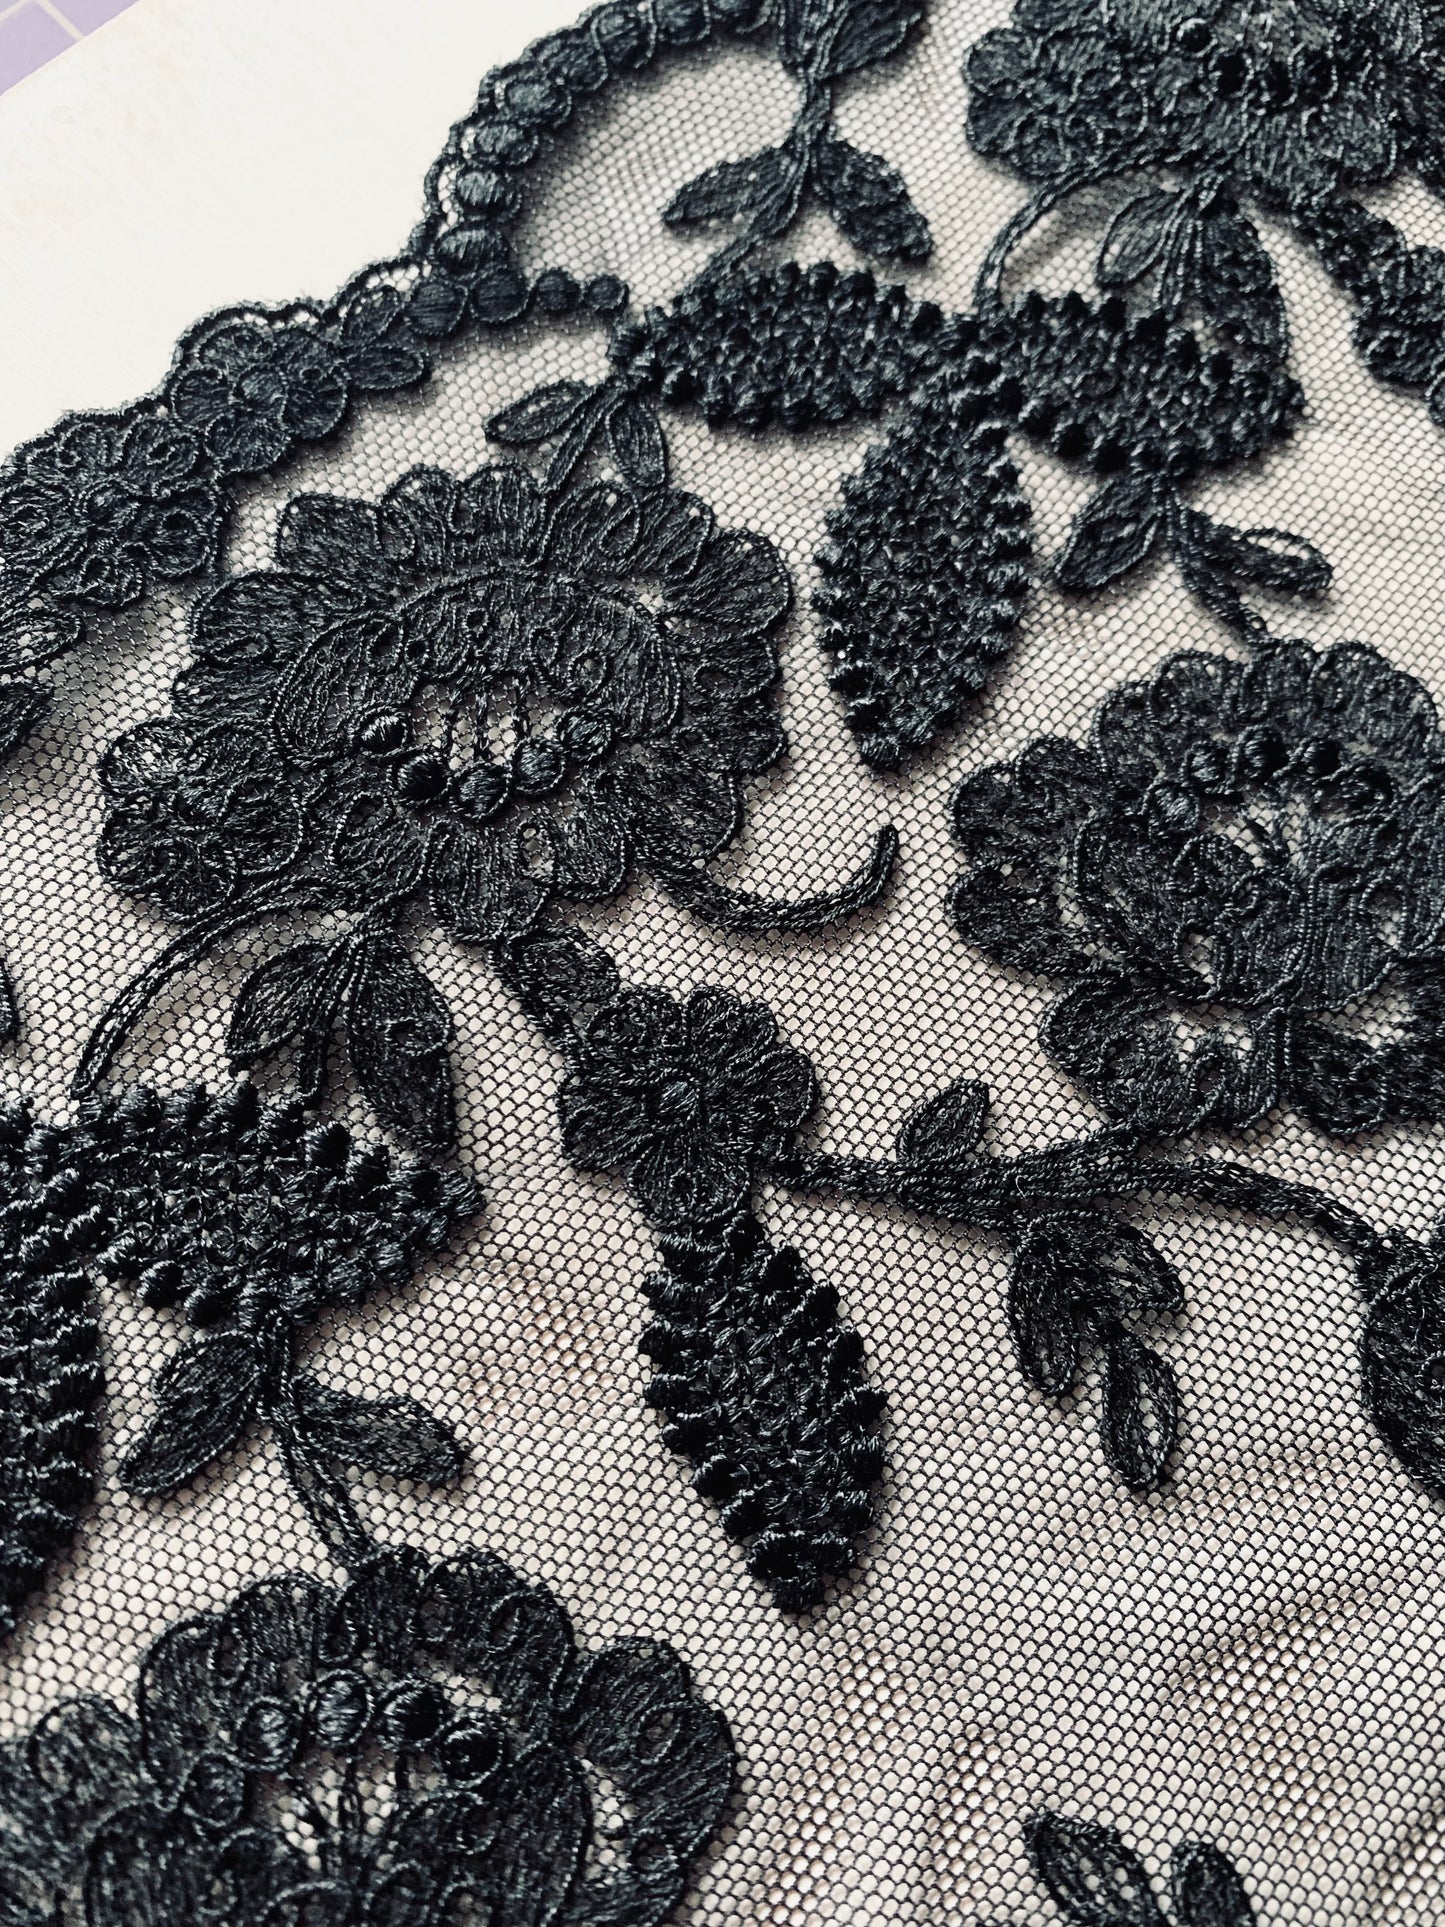 Embroidered Stretch Tulle | Black Lace Embroidery Galloon for Bra Making | Price per half metre